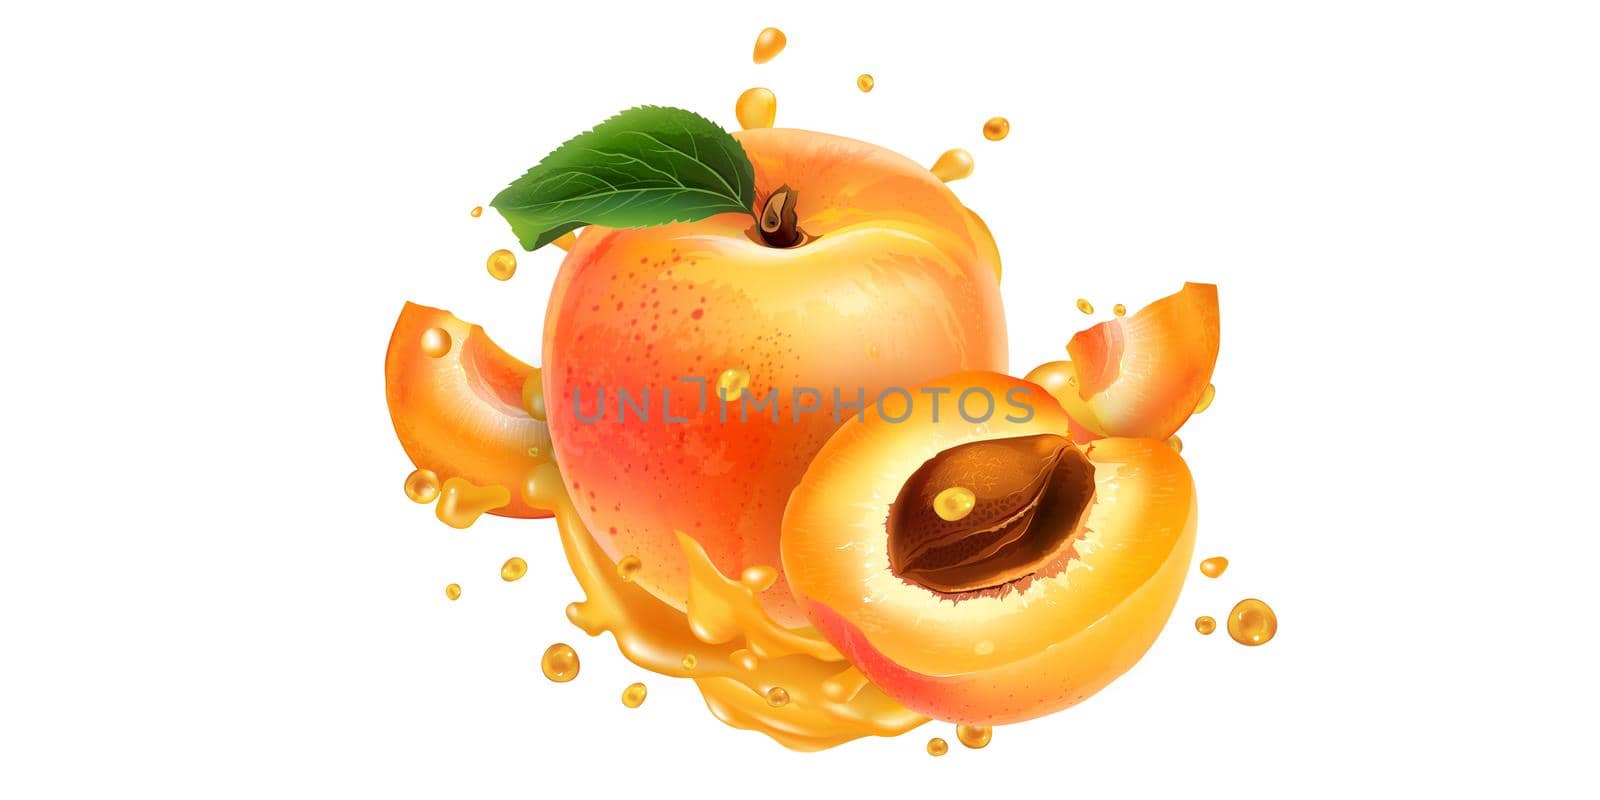 Whole and sliced apricots in fruit juice splashes on a white background. Realistic style illustration.